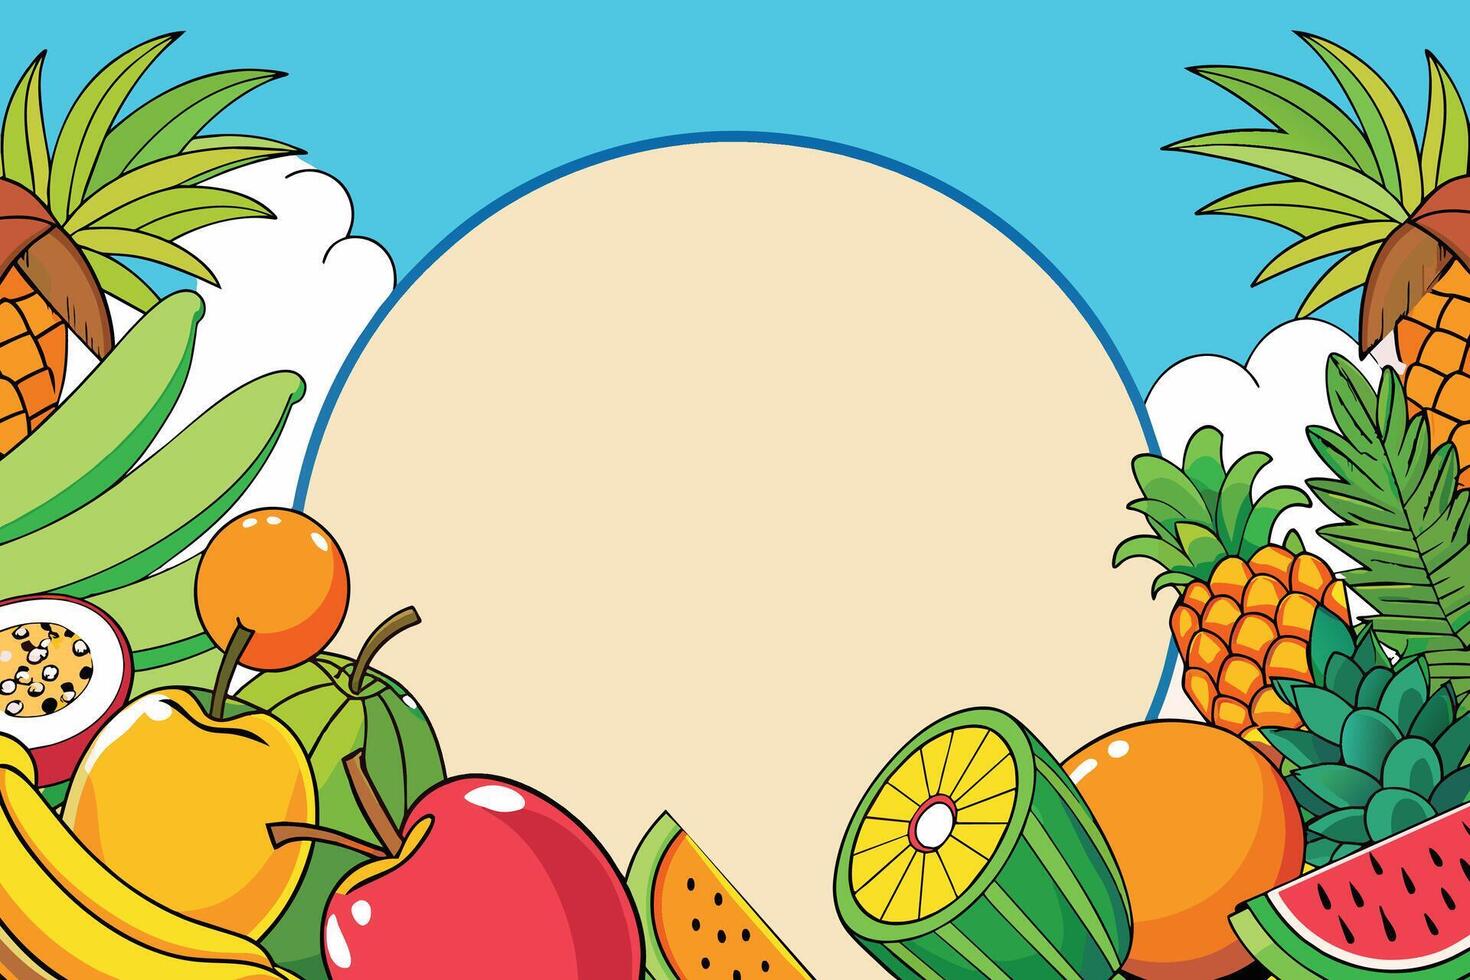 background with tropical fruits and berries design, vector illustration